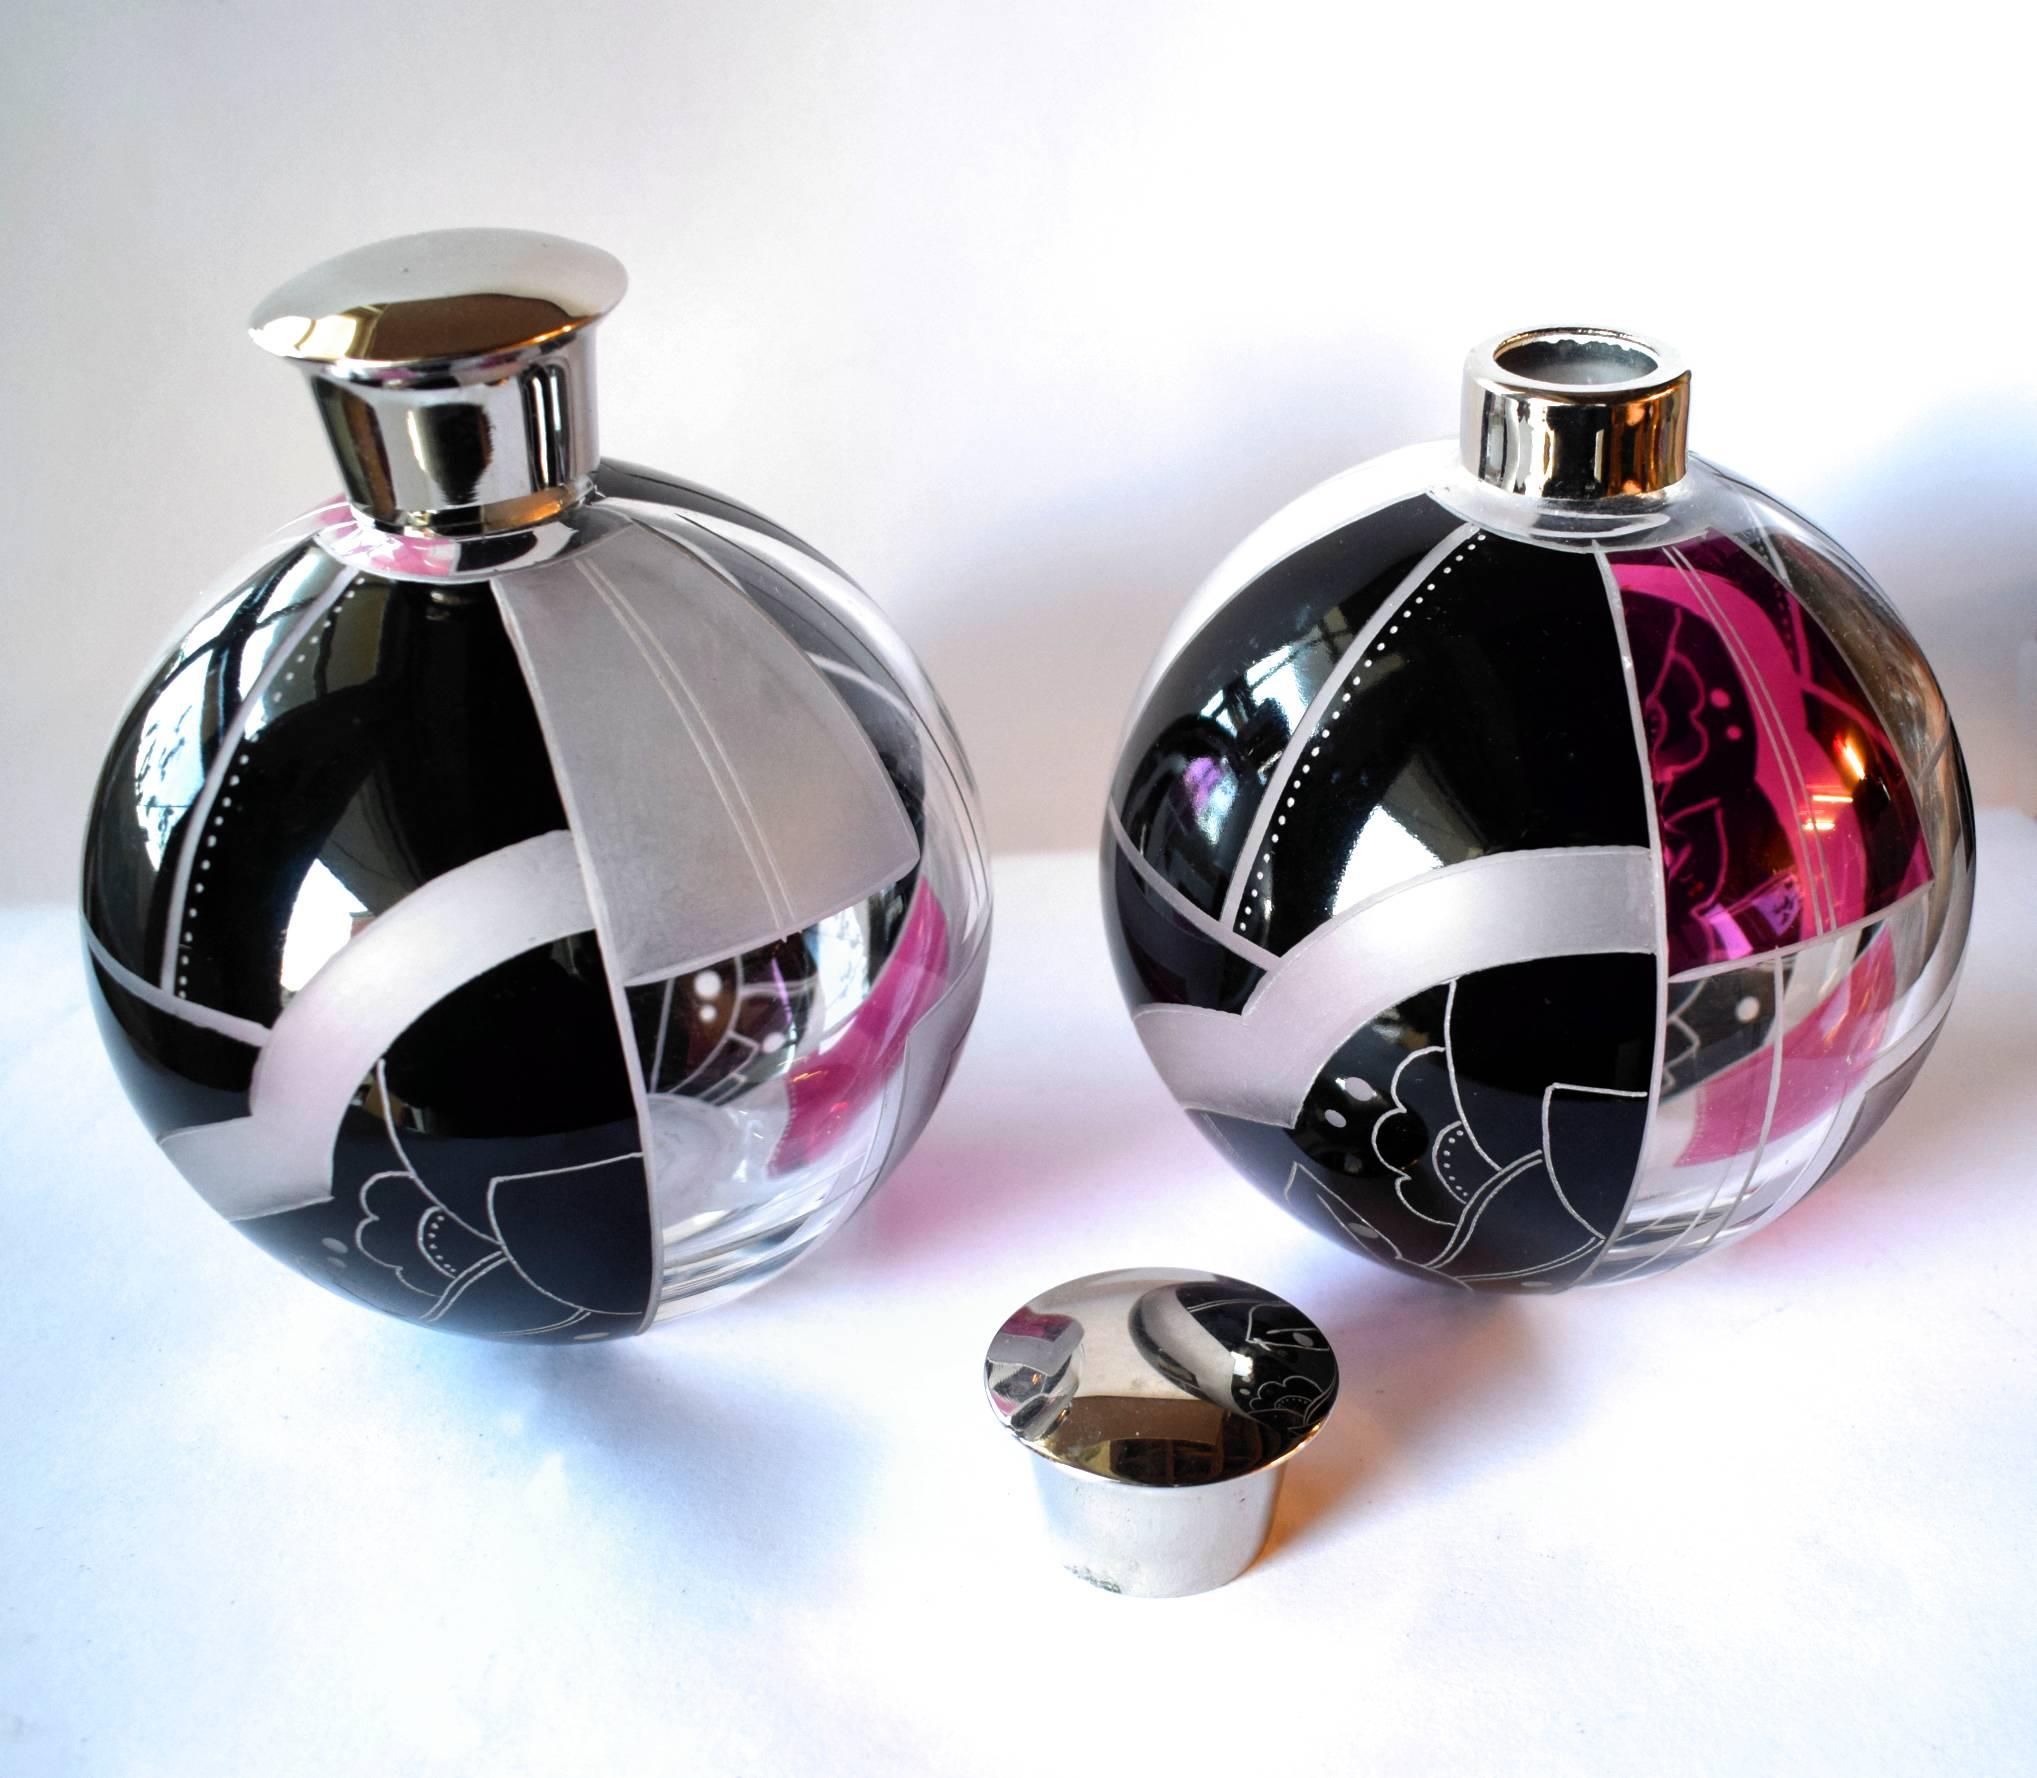 Such a rare find are these matching pair of large globe shaped Art Deco perfume bottles by Karl Palda. They are absolutely exquisite, every angle and side has a different design. I really can't sing the praises of these enough, if you want something